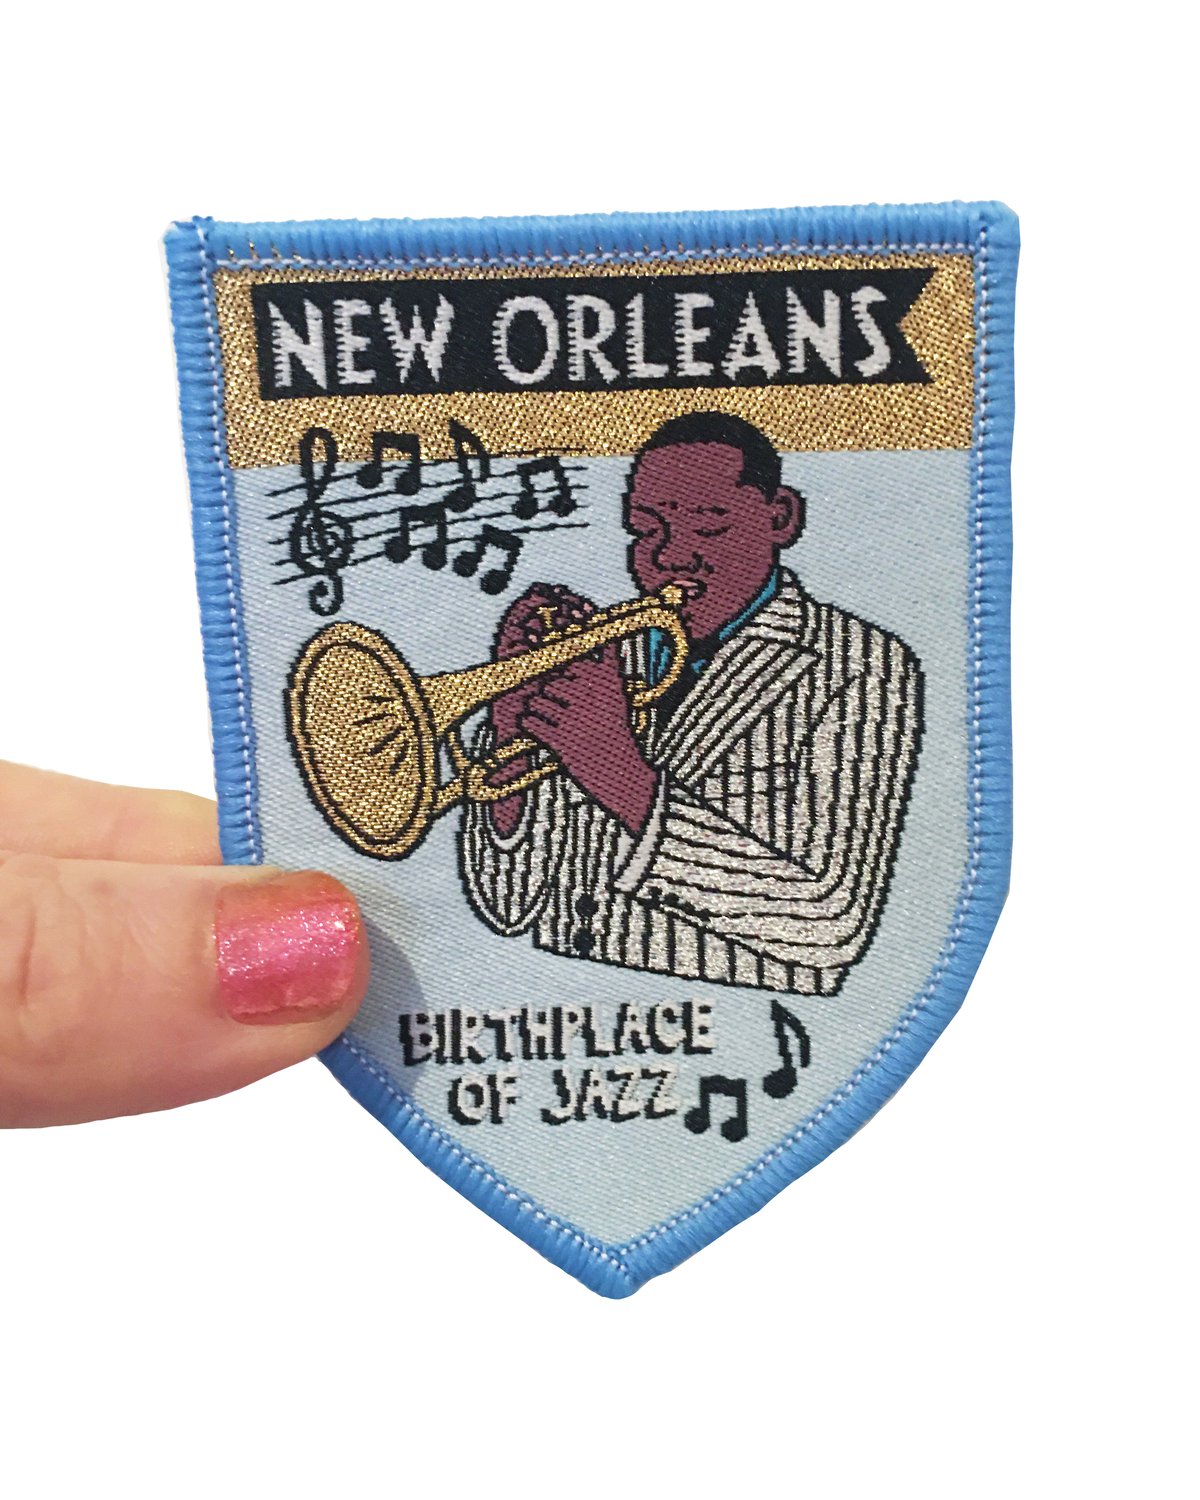 New Orleans Iron on Travel Patch